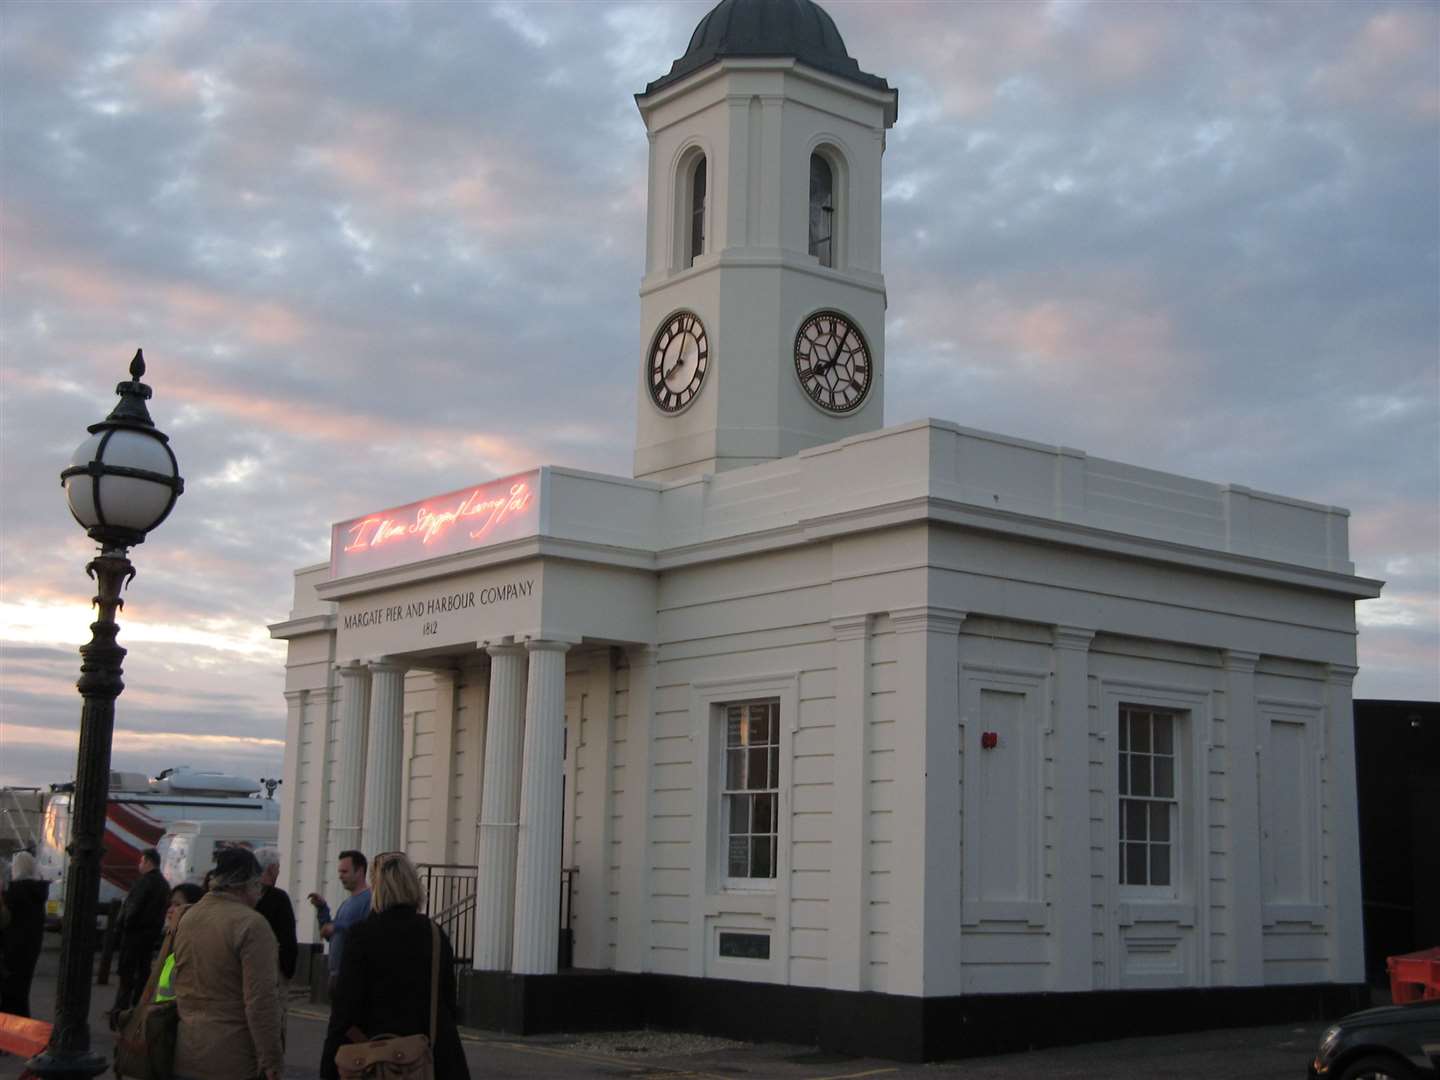 Plans by Thanet District Council to close the information centre at Droit House in Margate were given a late reprieve